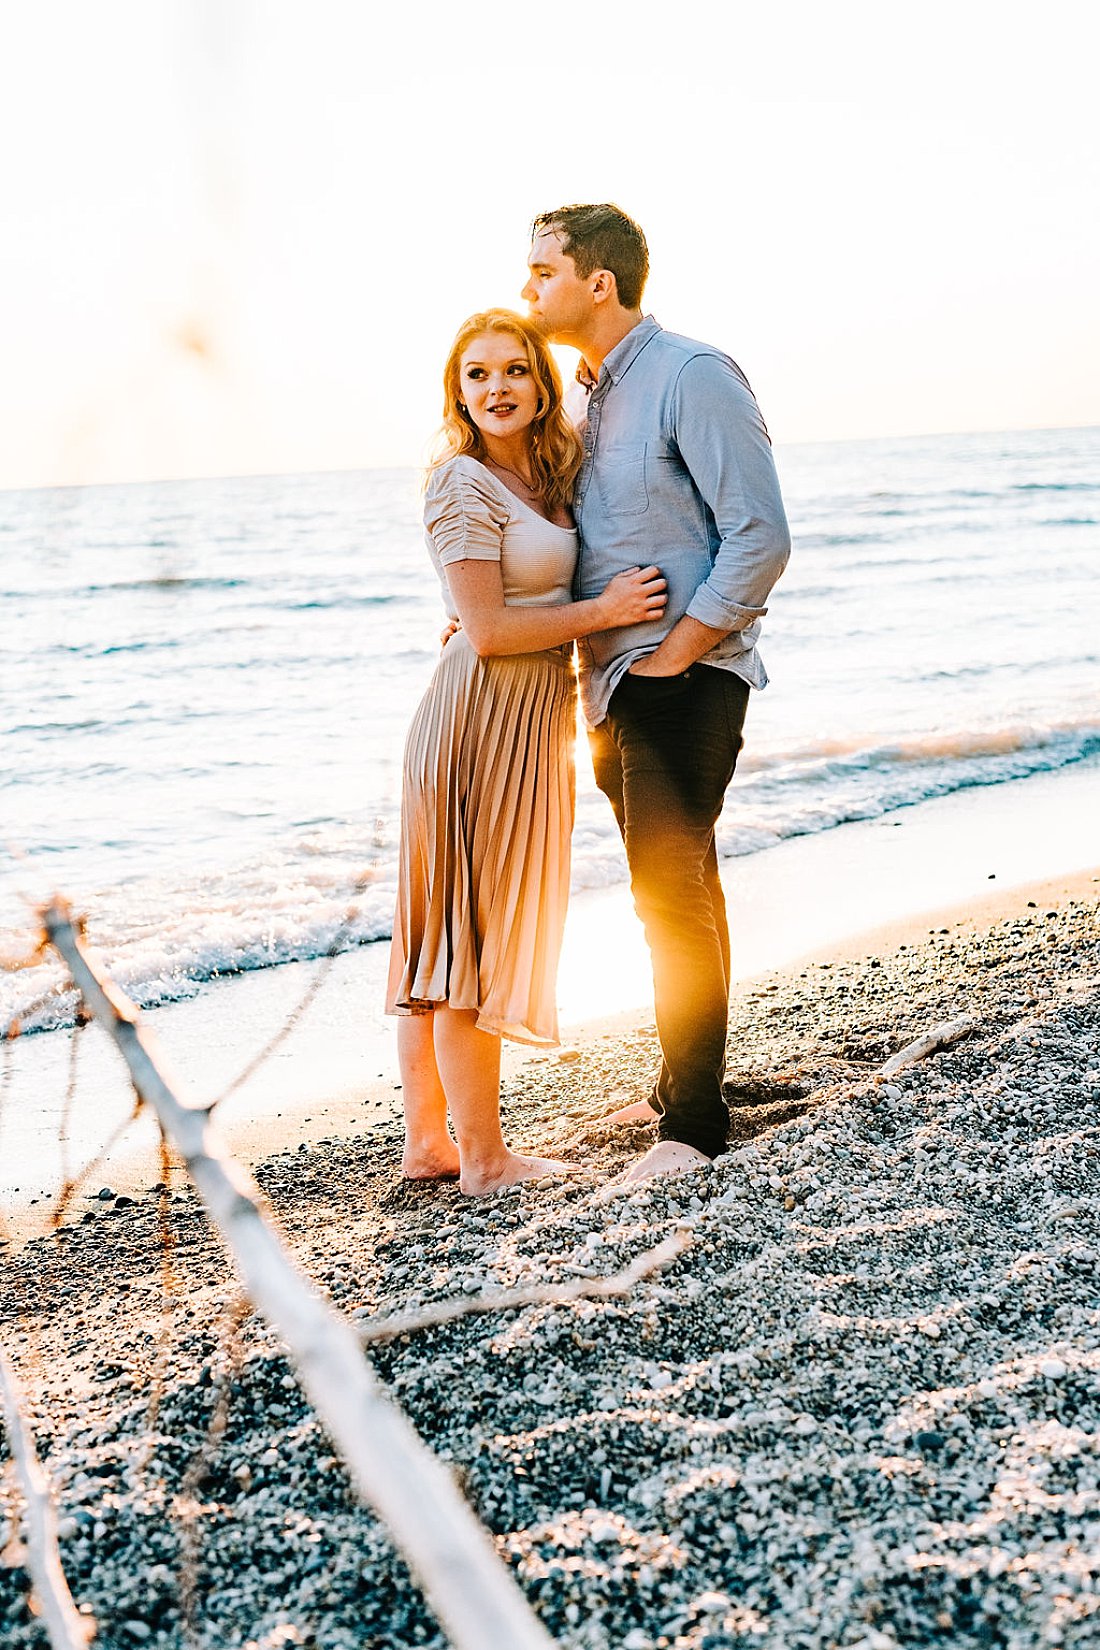 Camp Kintail Engagement Session